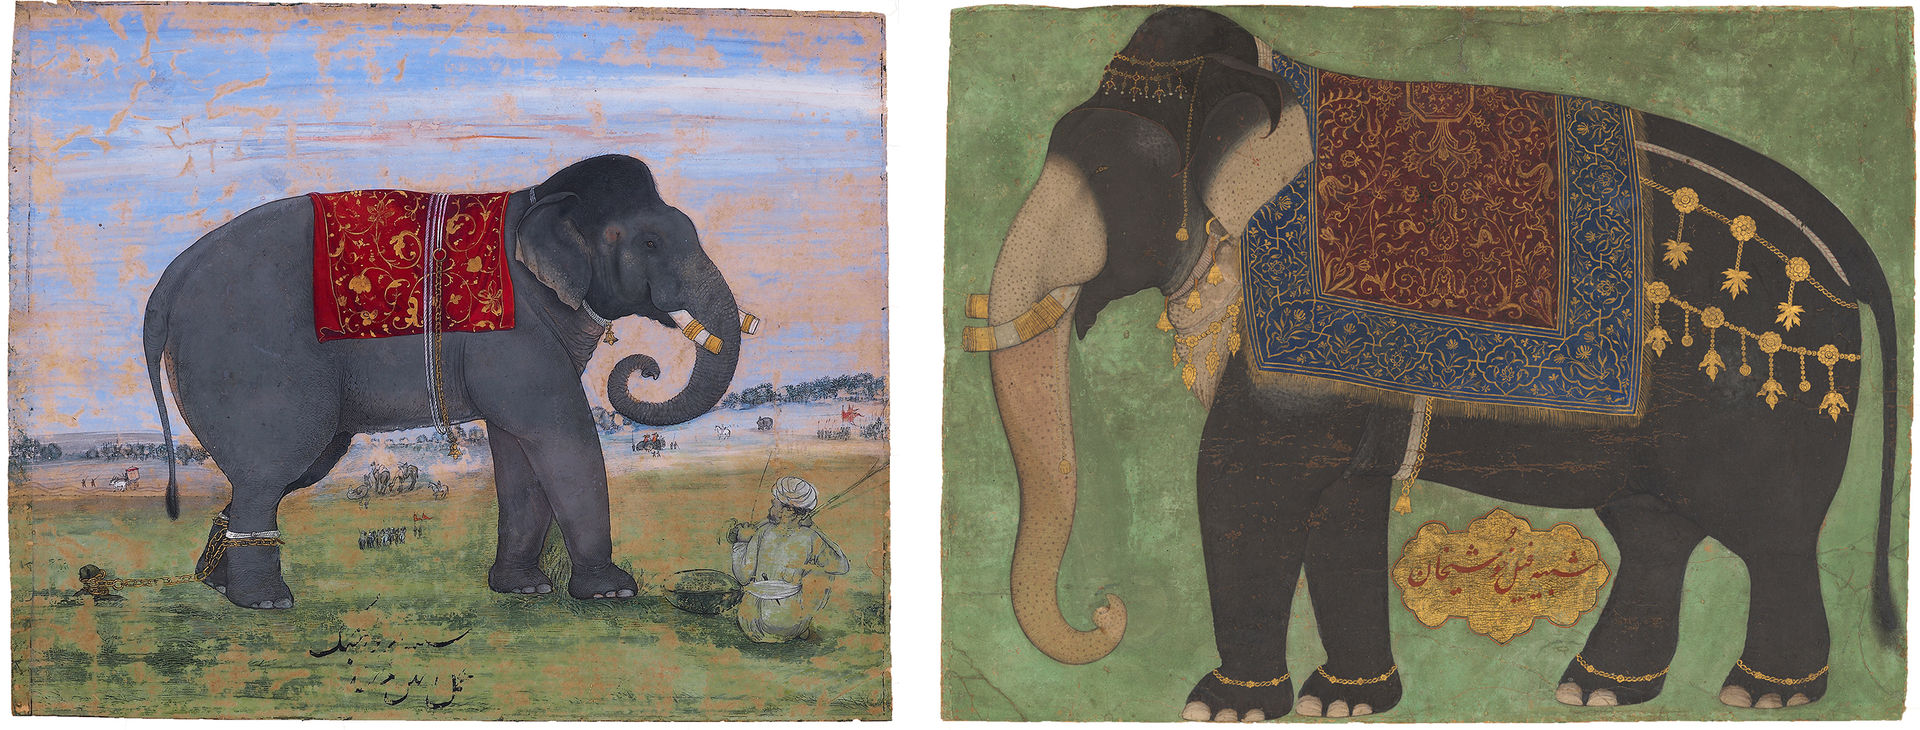 painting of an elephant in a field on the left and painting of an elephant against a green background on the right